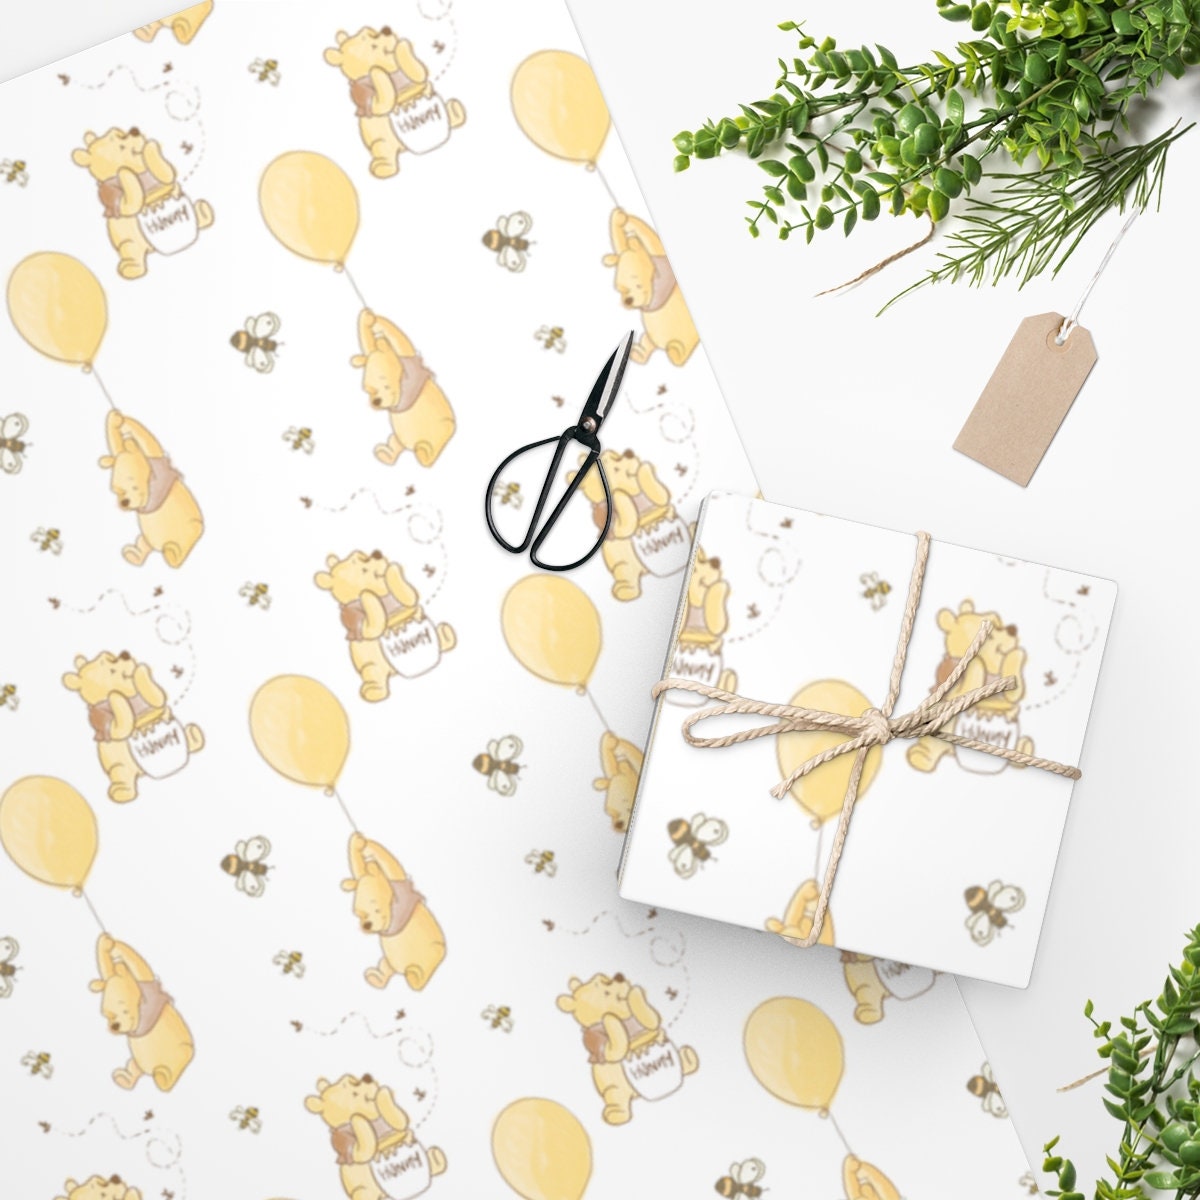 Winnie The Pooh Wrapping Paper Sheets sold by Caridad, SKU 24494379